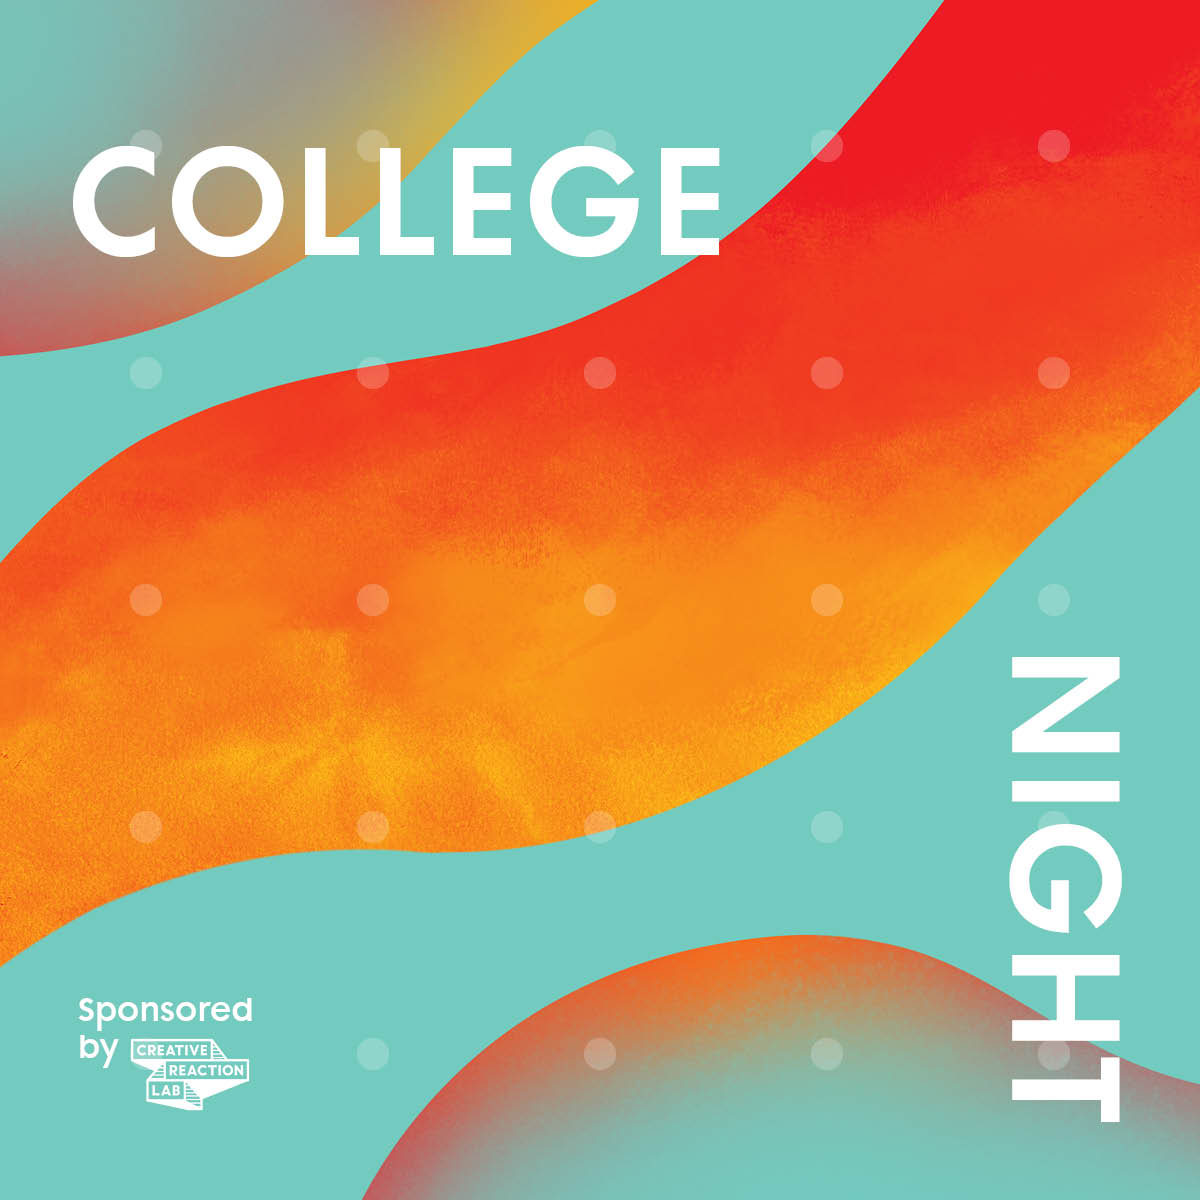 Teal and orange waves announcing college night in white text.